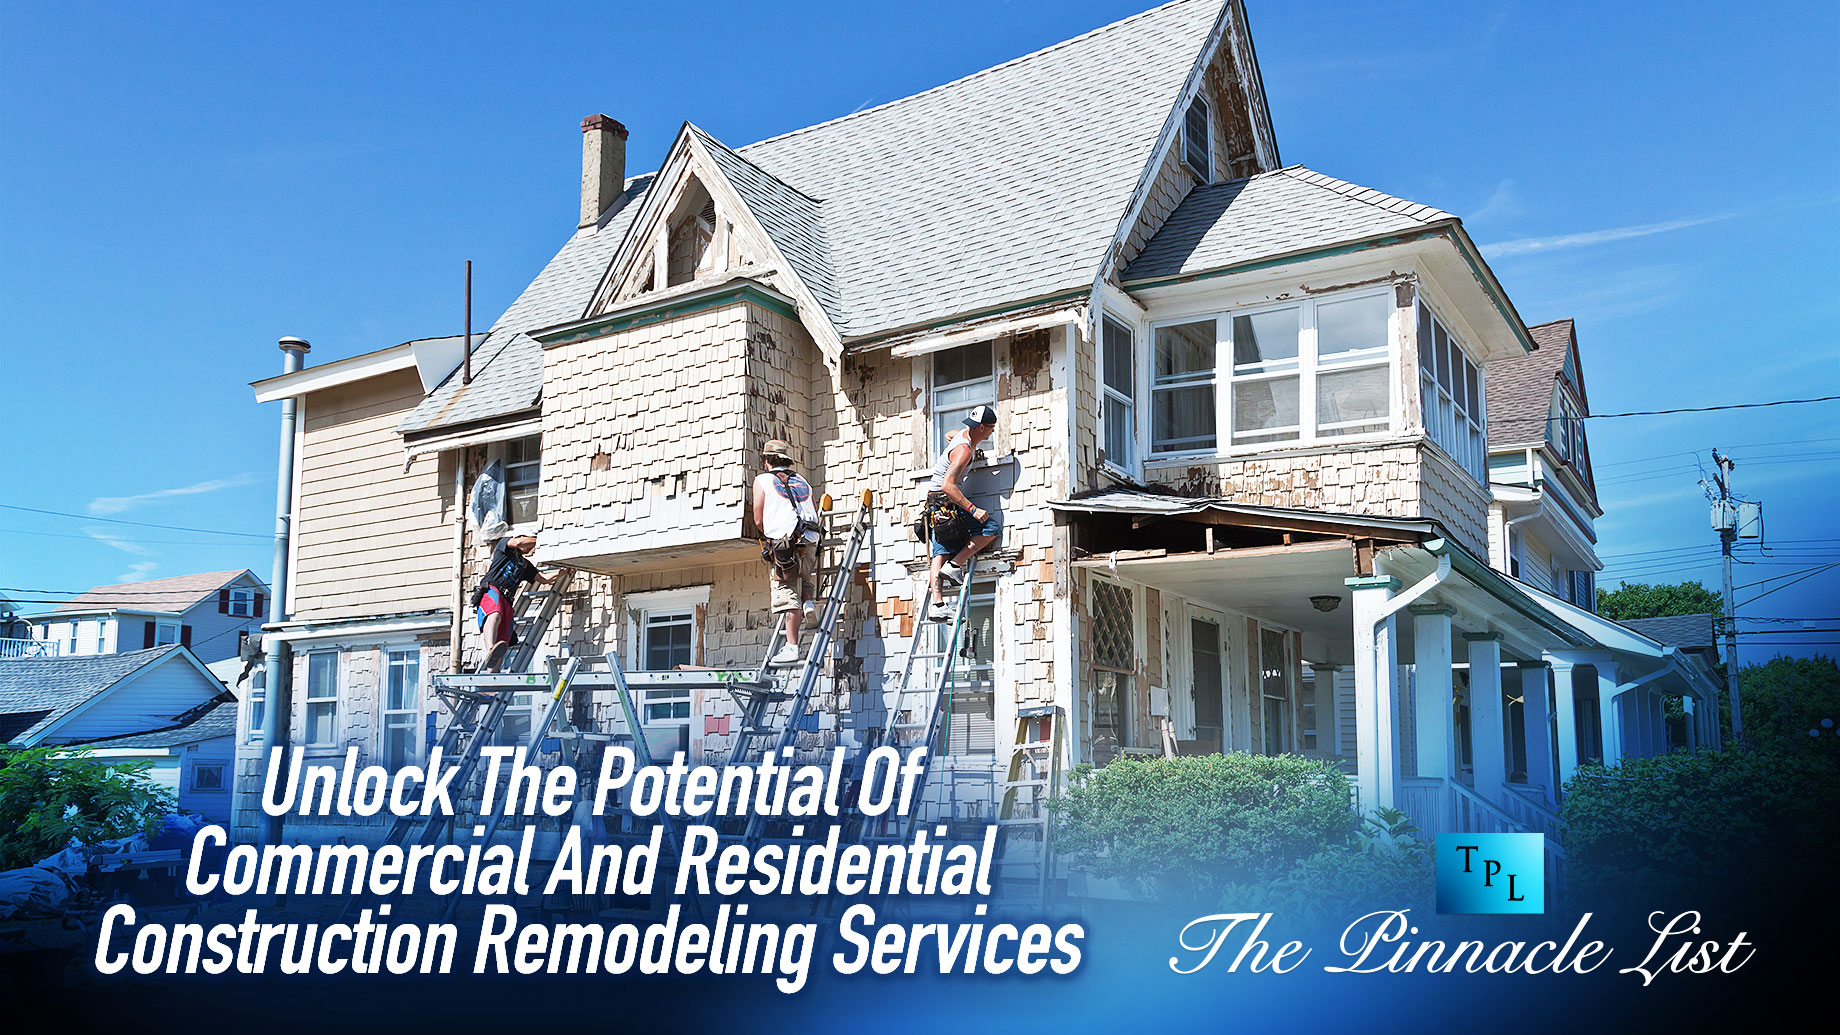 Unlock The Potential Of Commercial And Residential Construction Remodeling Services